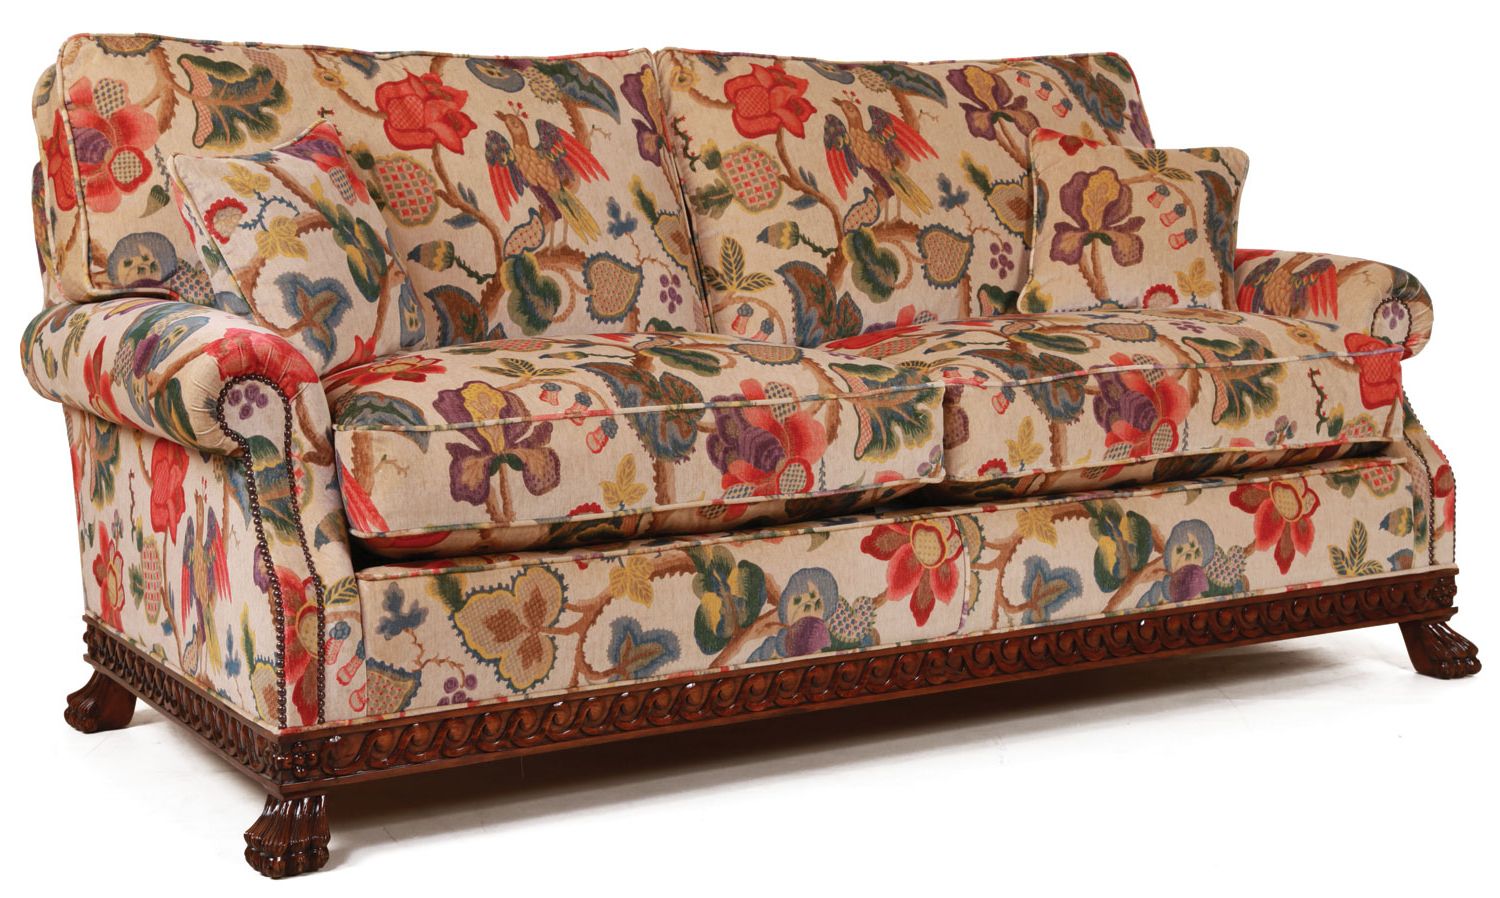 Sofas In Pattern Pertaining To Latest Dartington Sofa In A Floral Print Velvet, Fabric Sofas In Stock From (View 14 of 15)